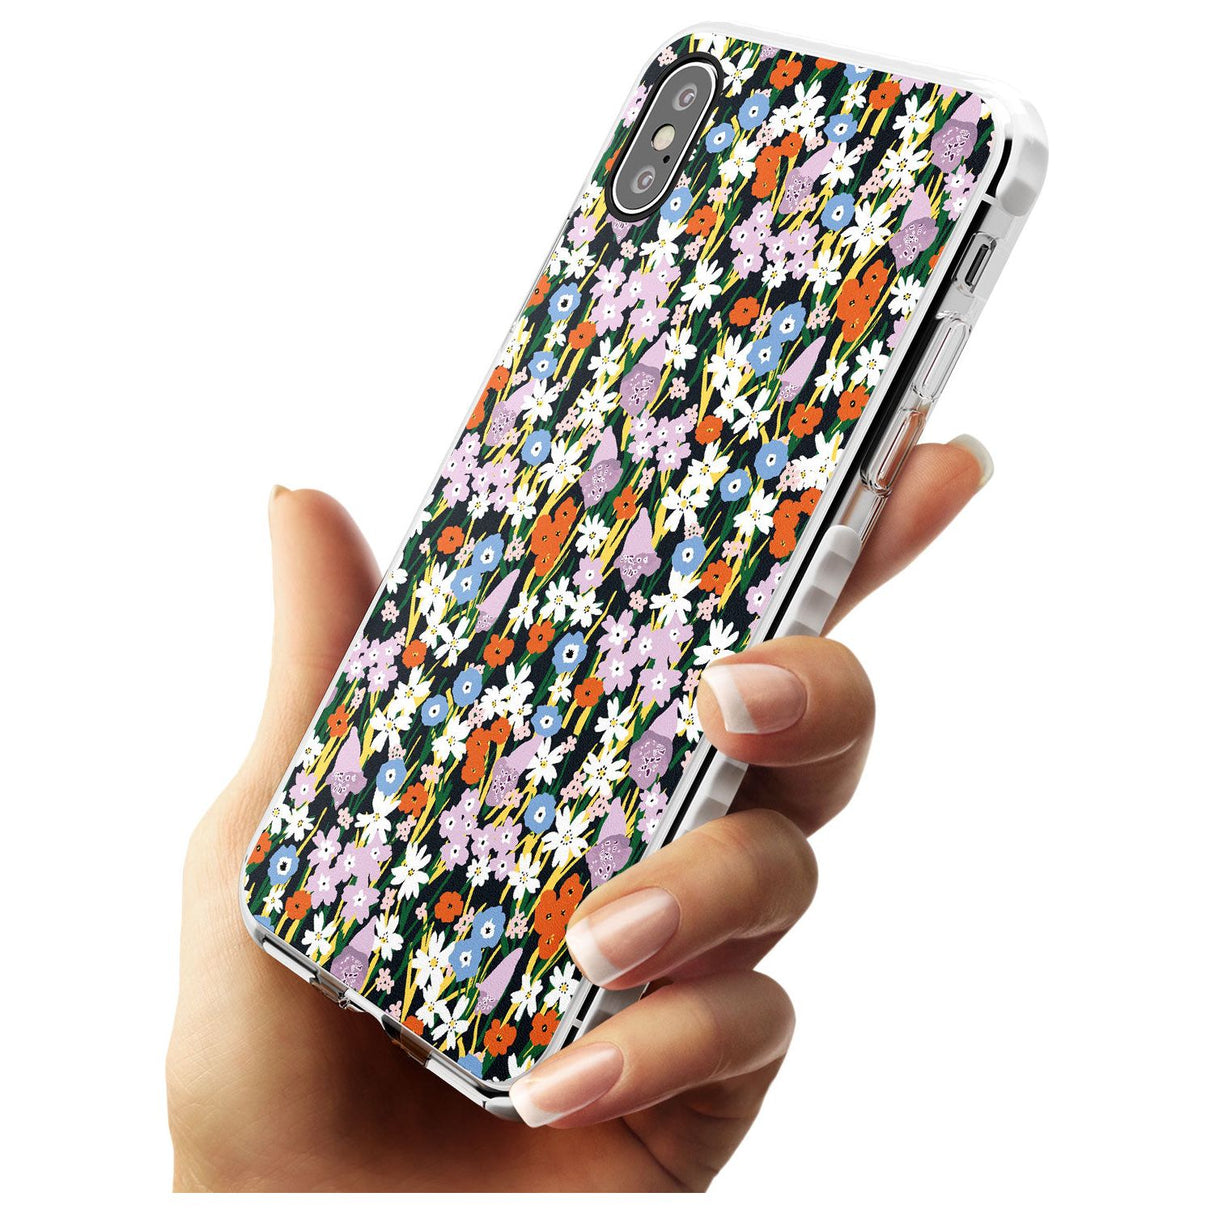 Energetic Floral Mix: Solid Slim TPU Phone Case Warehouse X XS Max XR